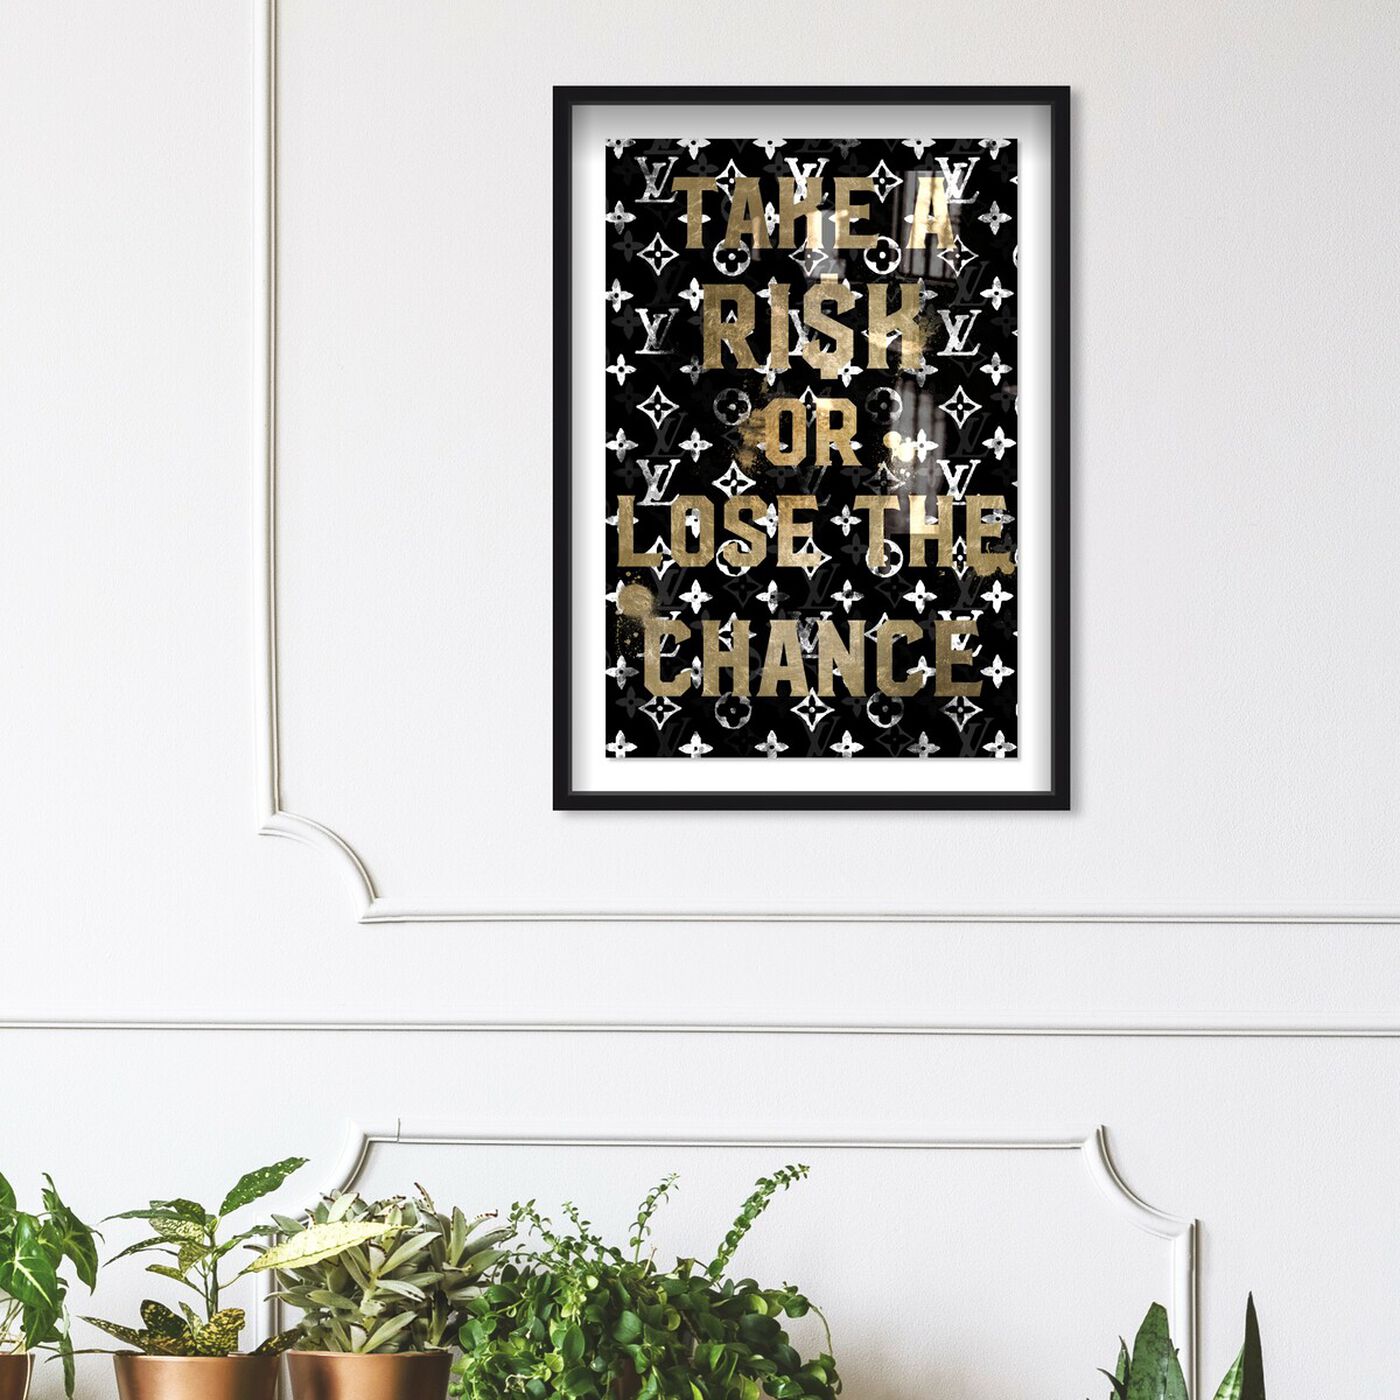 Hanging view of You Know That featuring typography and quotes and motivational quotes and sayings art.